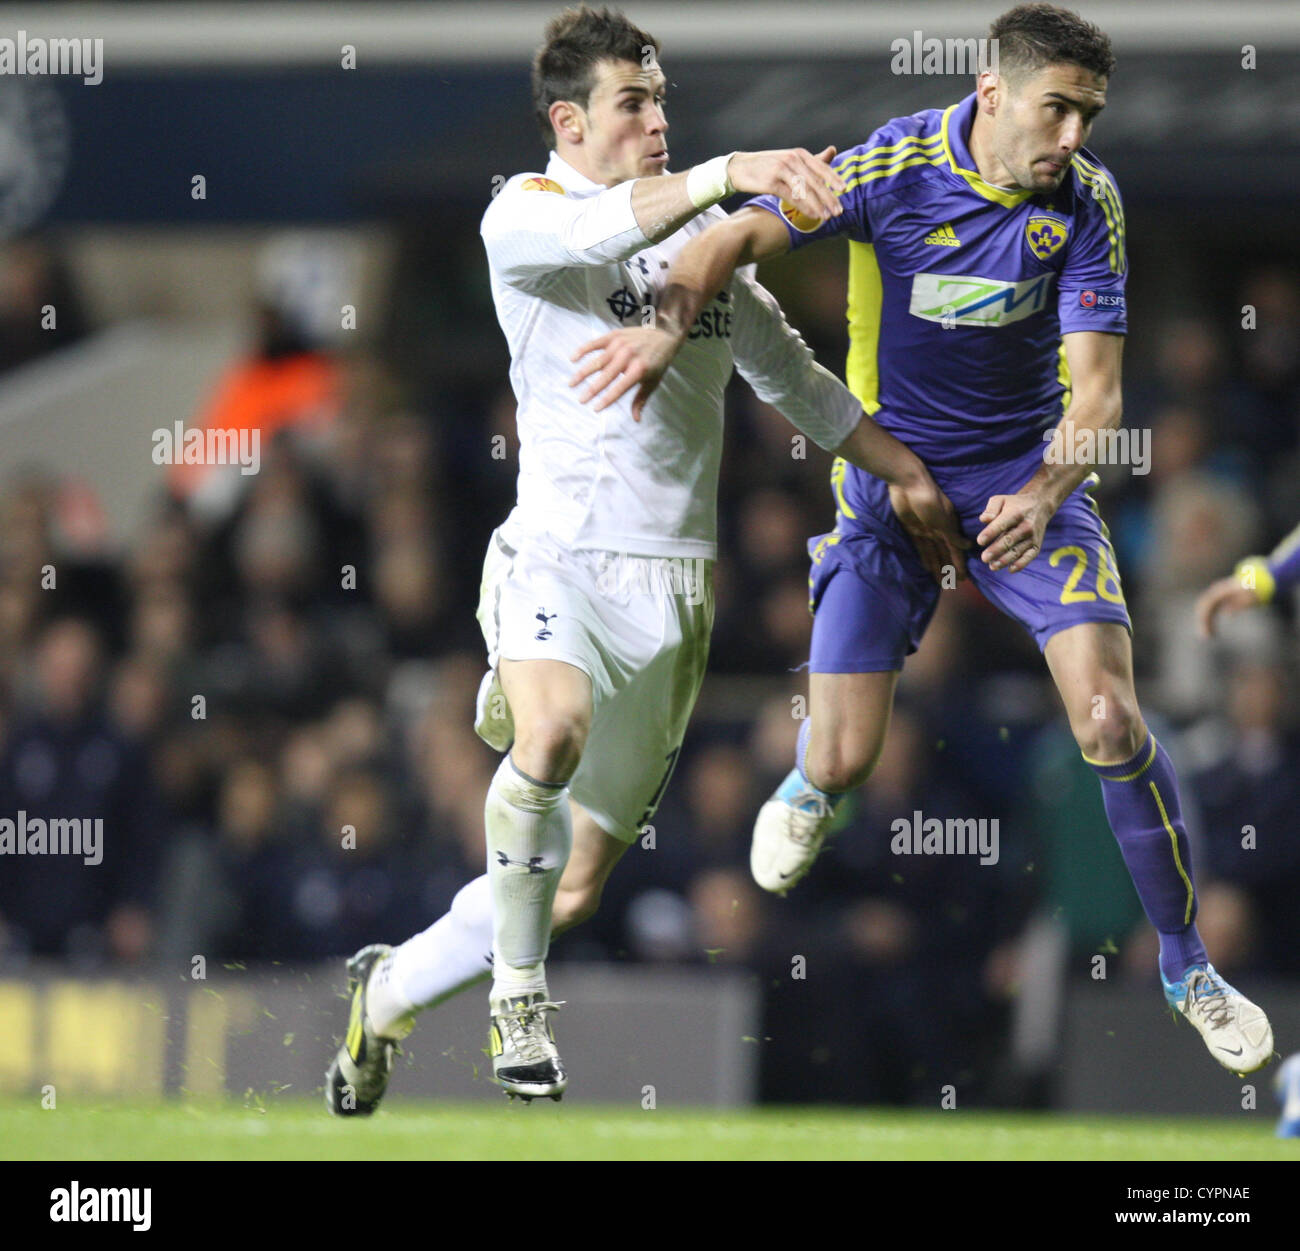 08.11.2012. North London, England.   Gareth Bale of Tottenham Hotspur and Mitja Viler of NK Maribor in action during the Europa League Group J match between Tottenham Hotspur and NK Maribor from White Hart Lane, London Stock Photo